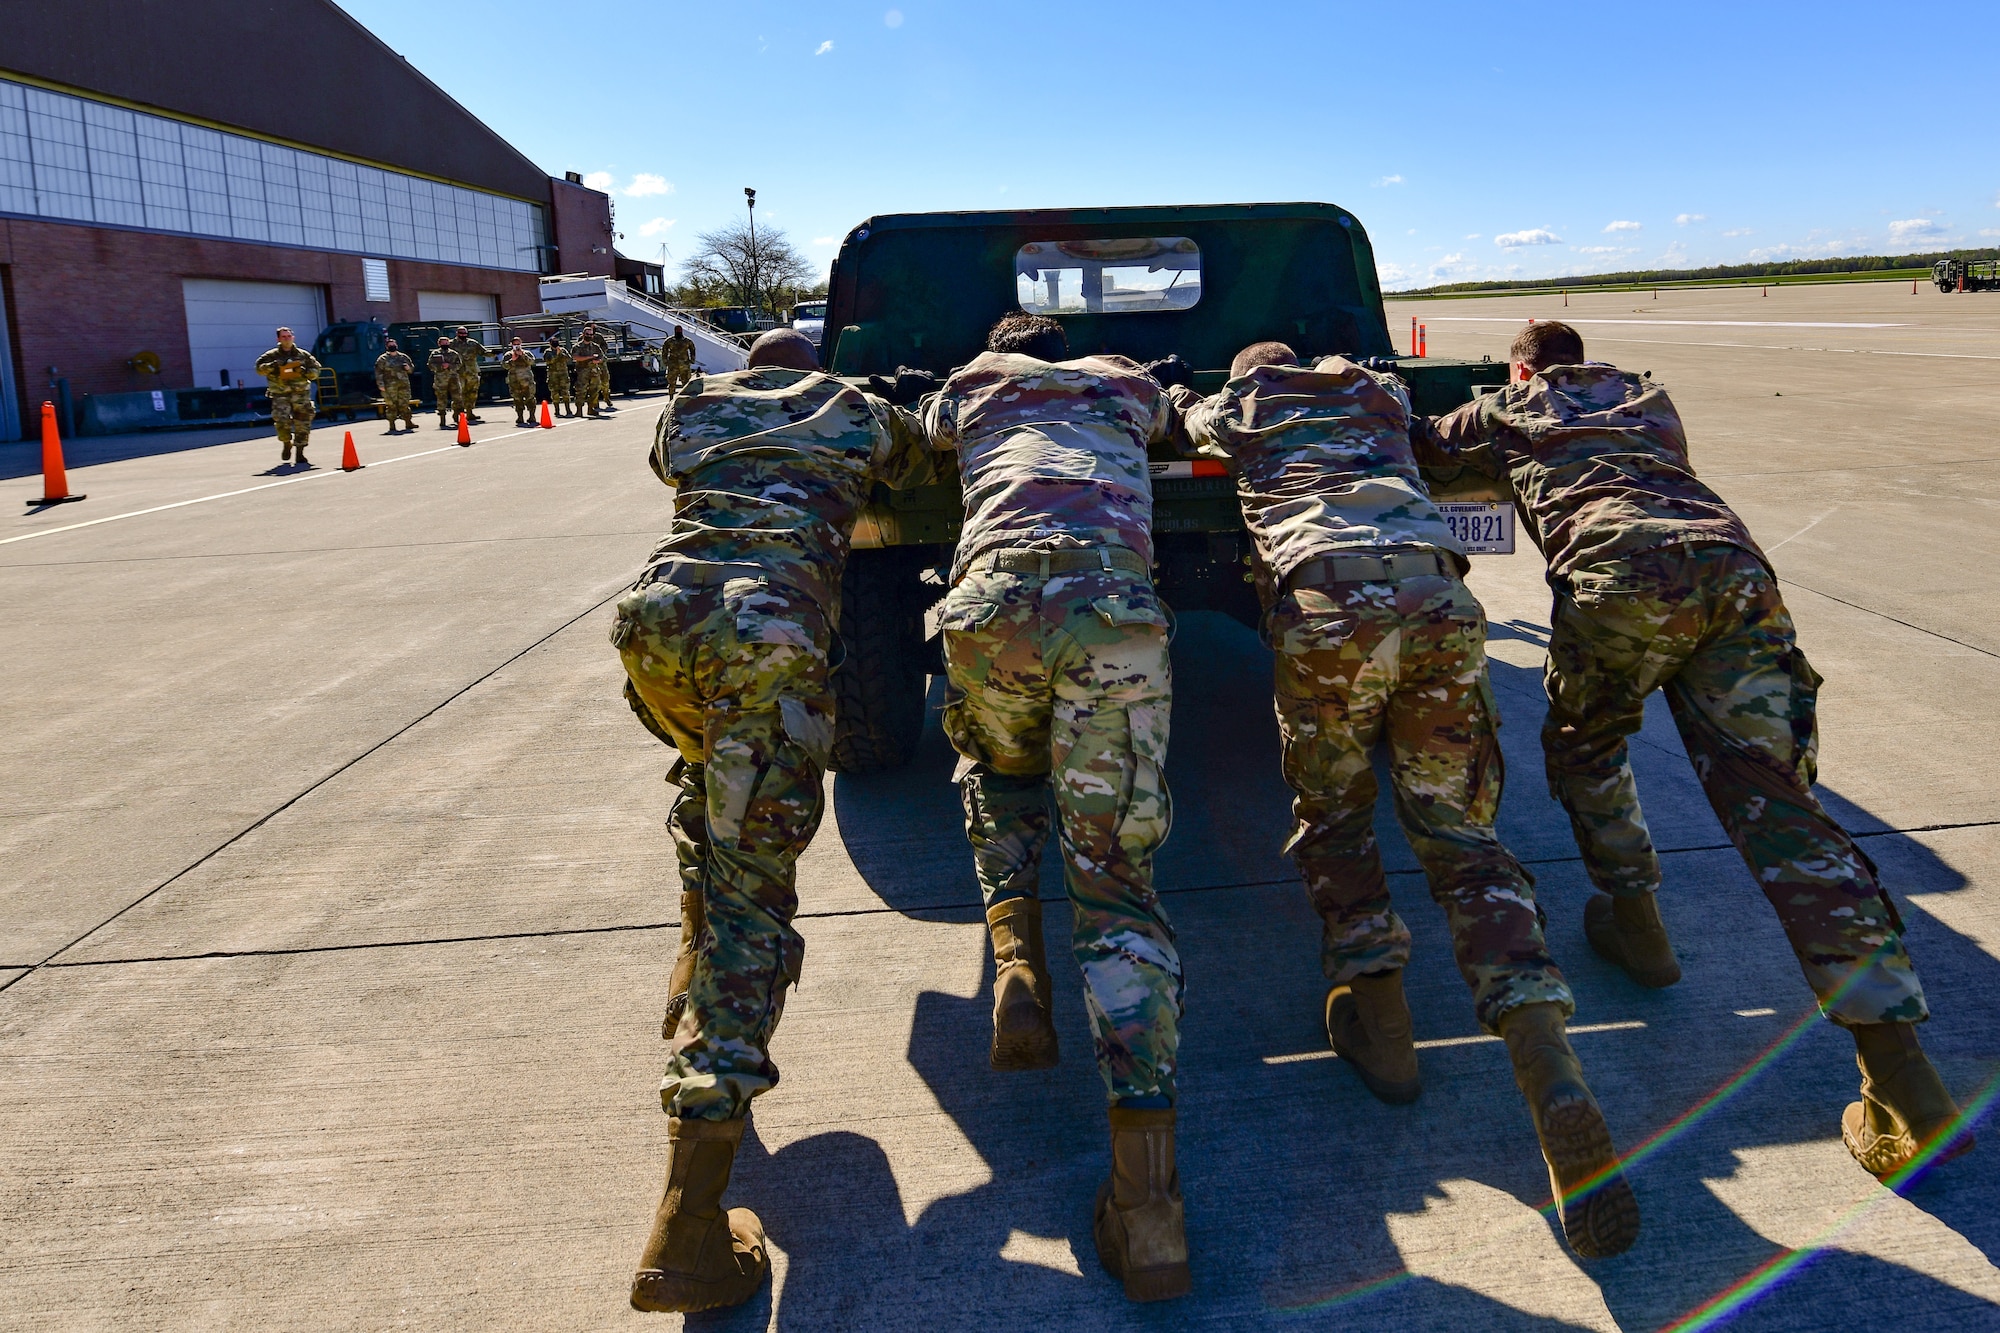 The 76er is an annual event held in-house to test Airmen’s skills in a team-based competition spanning multiple events. It emulates the Port Dawg Challenge that Air Force Reserve Command holds every two years.